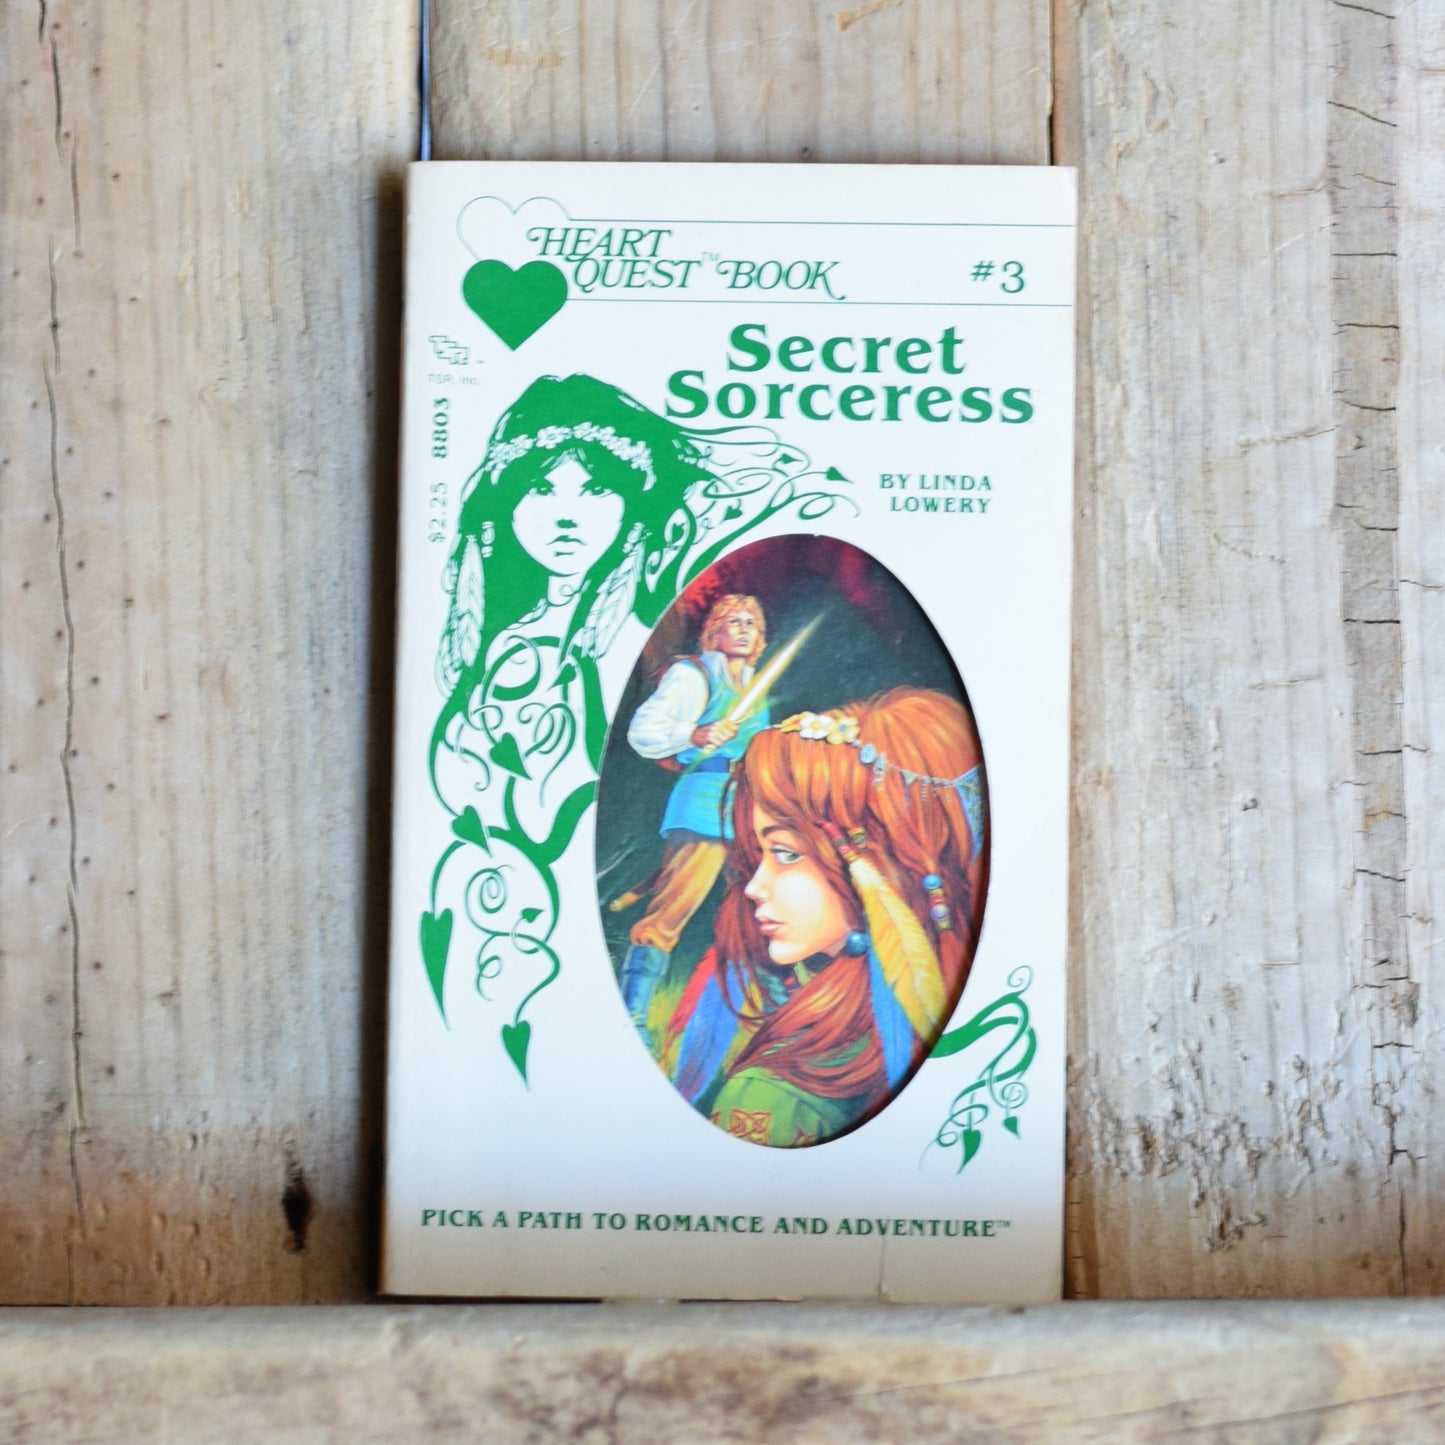 Vintage Dungeons and Dragons Paperback: Linda Lowery - Heart Quest: Secret Sorceress SECOND PRINTING